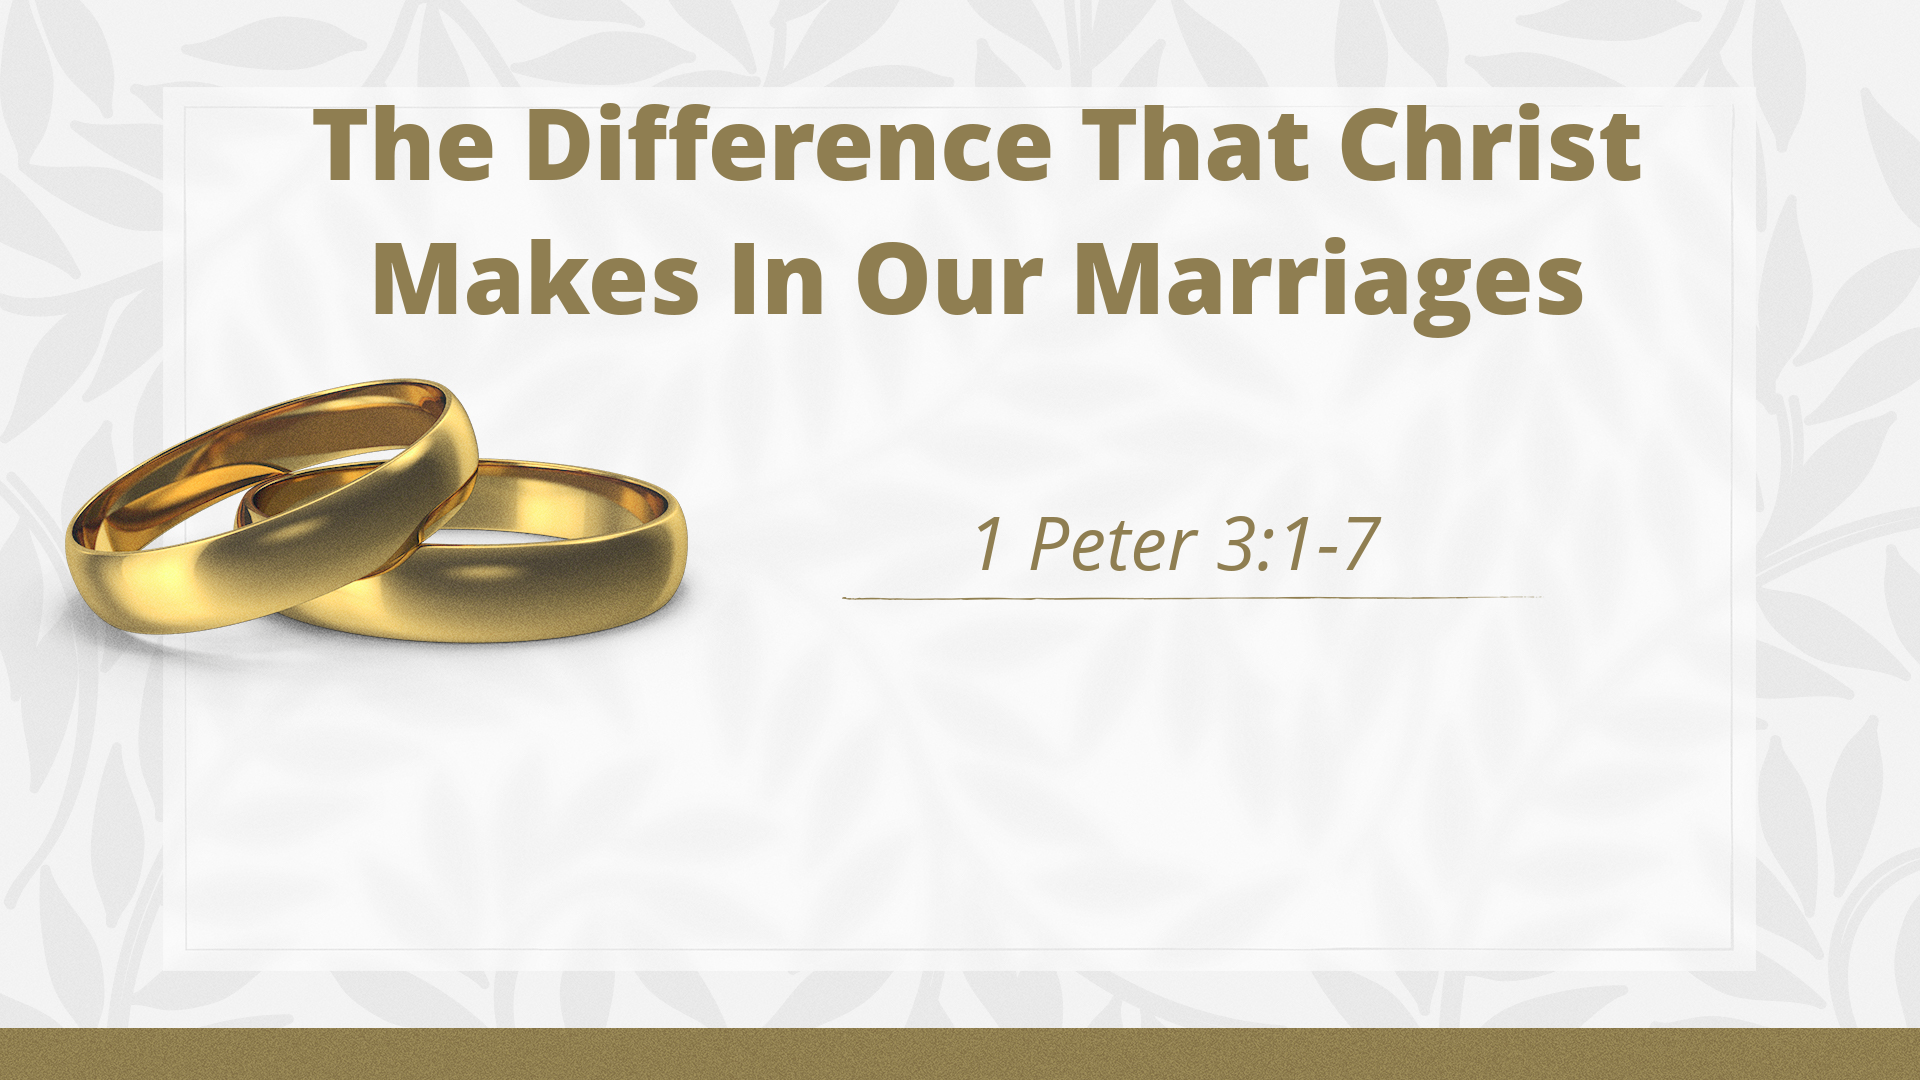 The Difference That Christ Makes In Our Marriages